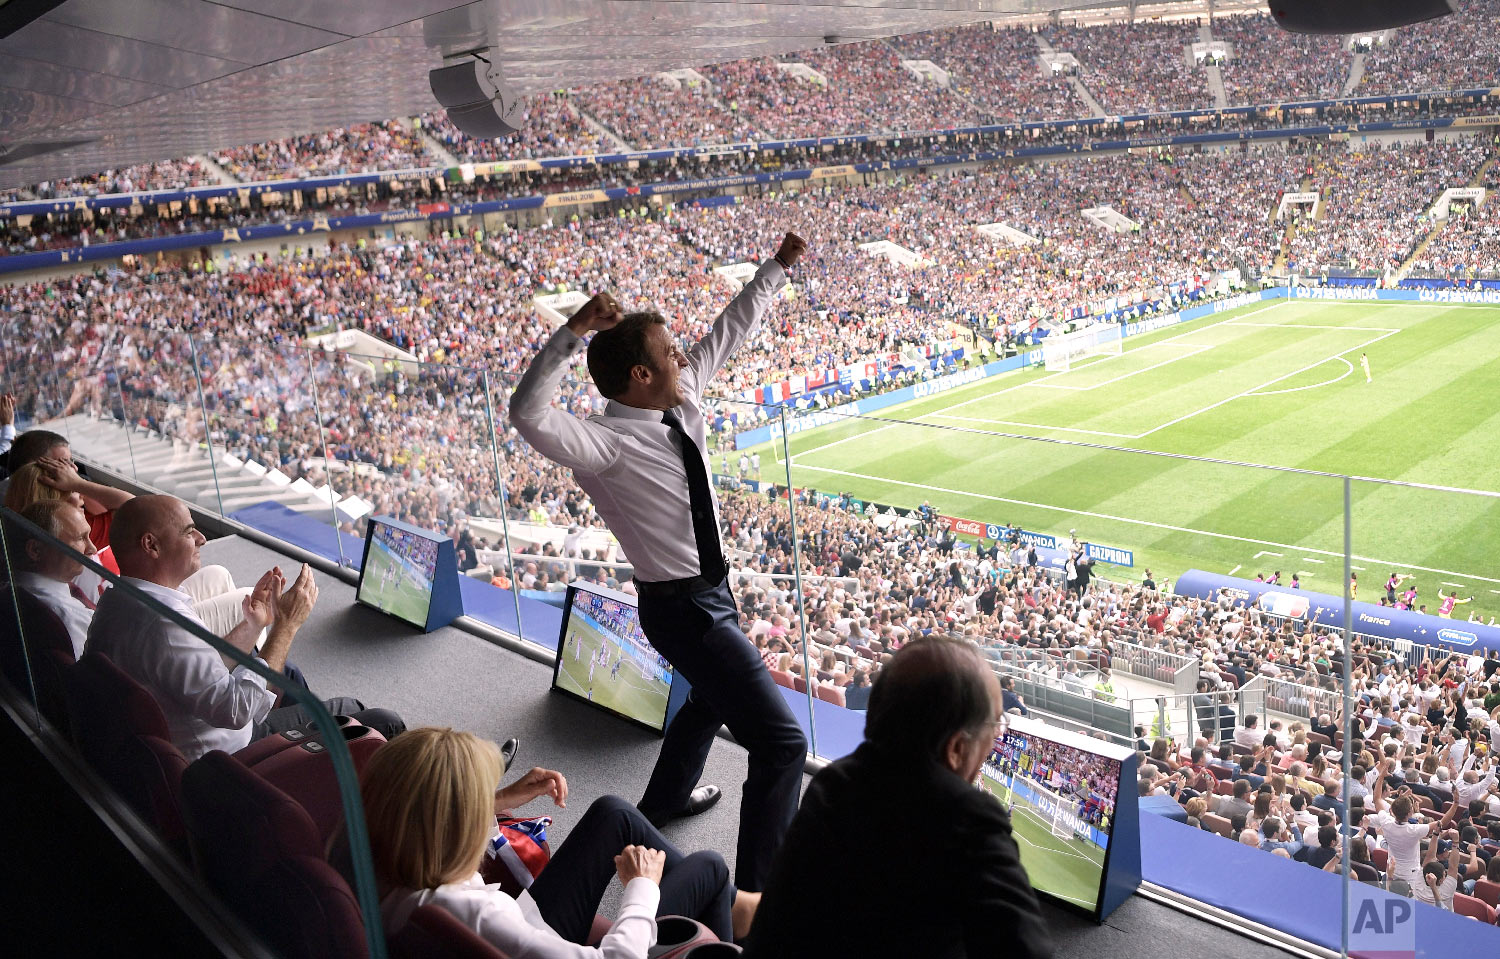  French President Emmanuel Macron cheers during the final match between France and Croatia at the 2018 soccer World Cup in the Luzhniki Stadium in Moscow, Russia, on July 15, 2018. (Alexei Nikolsky/Sputnik/Kremlin Pool Photo via AP) 